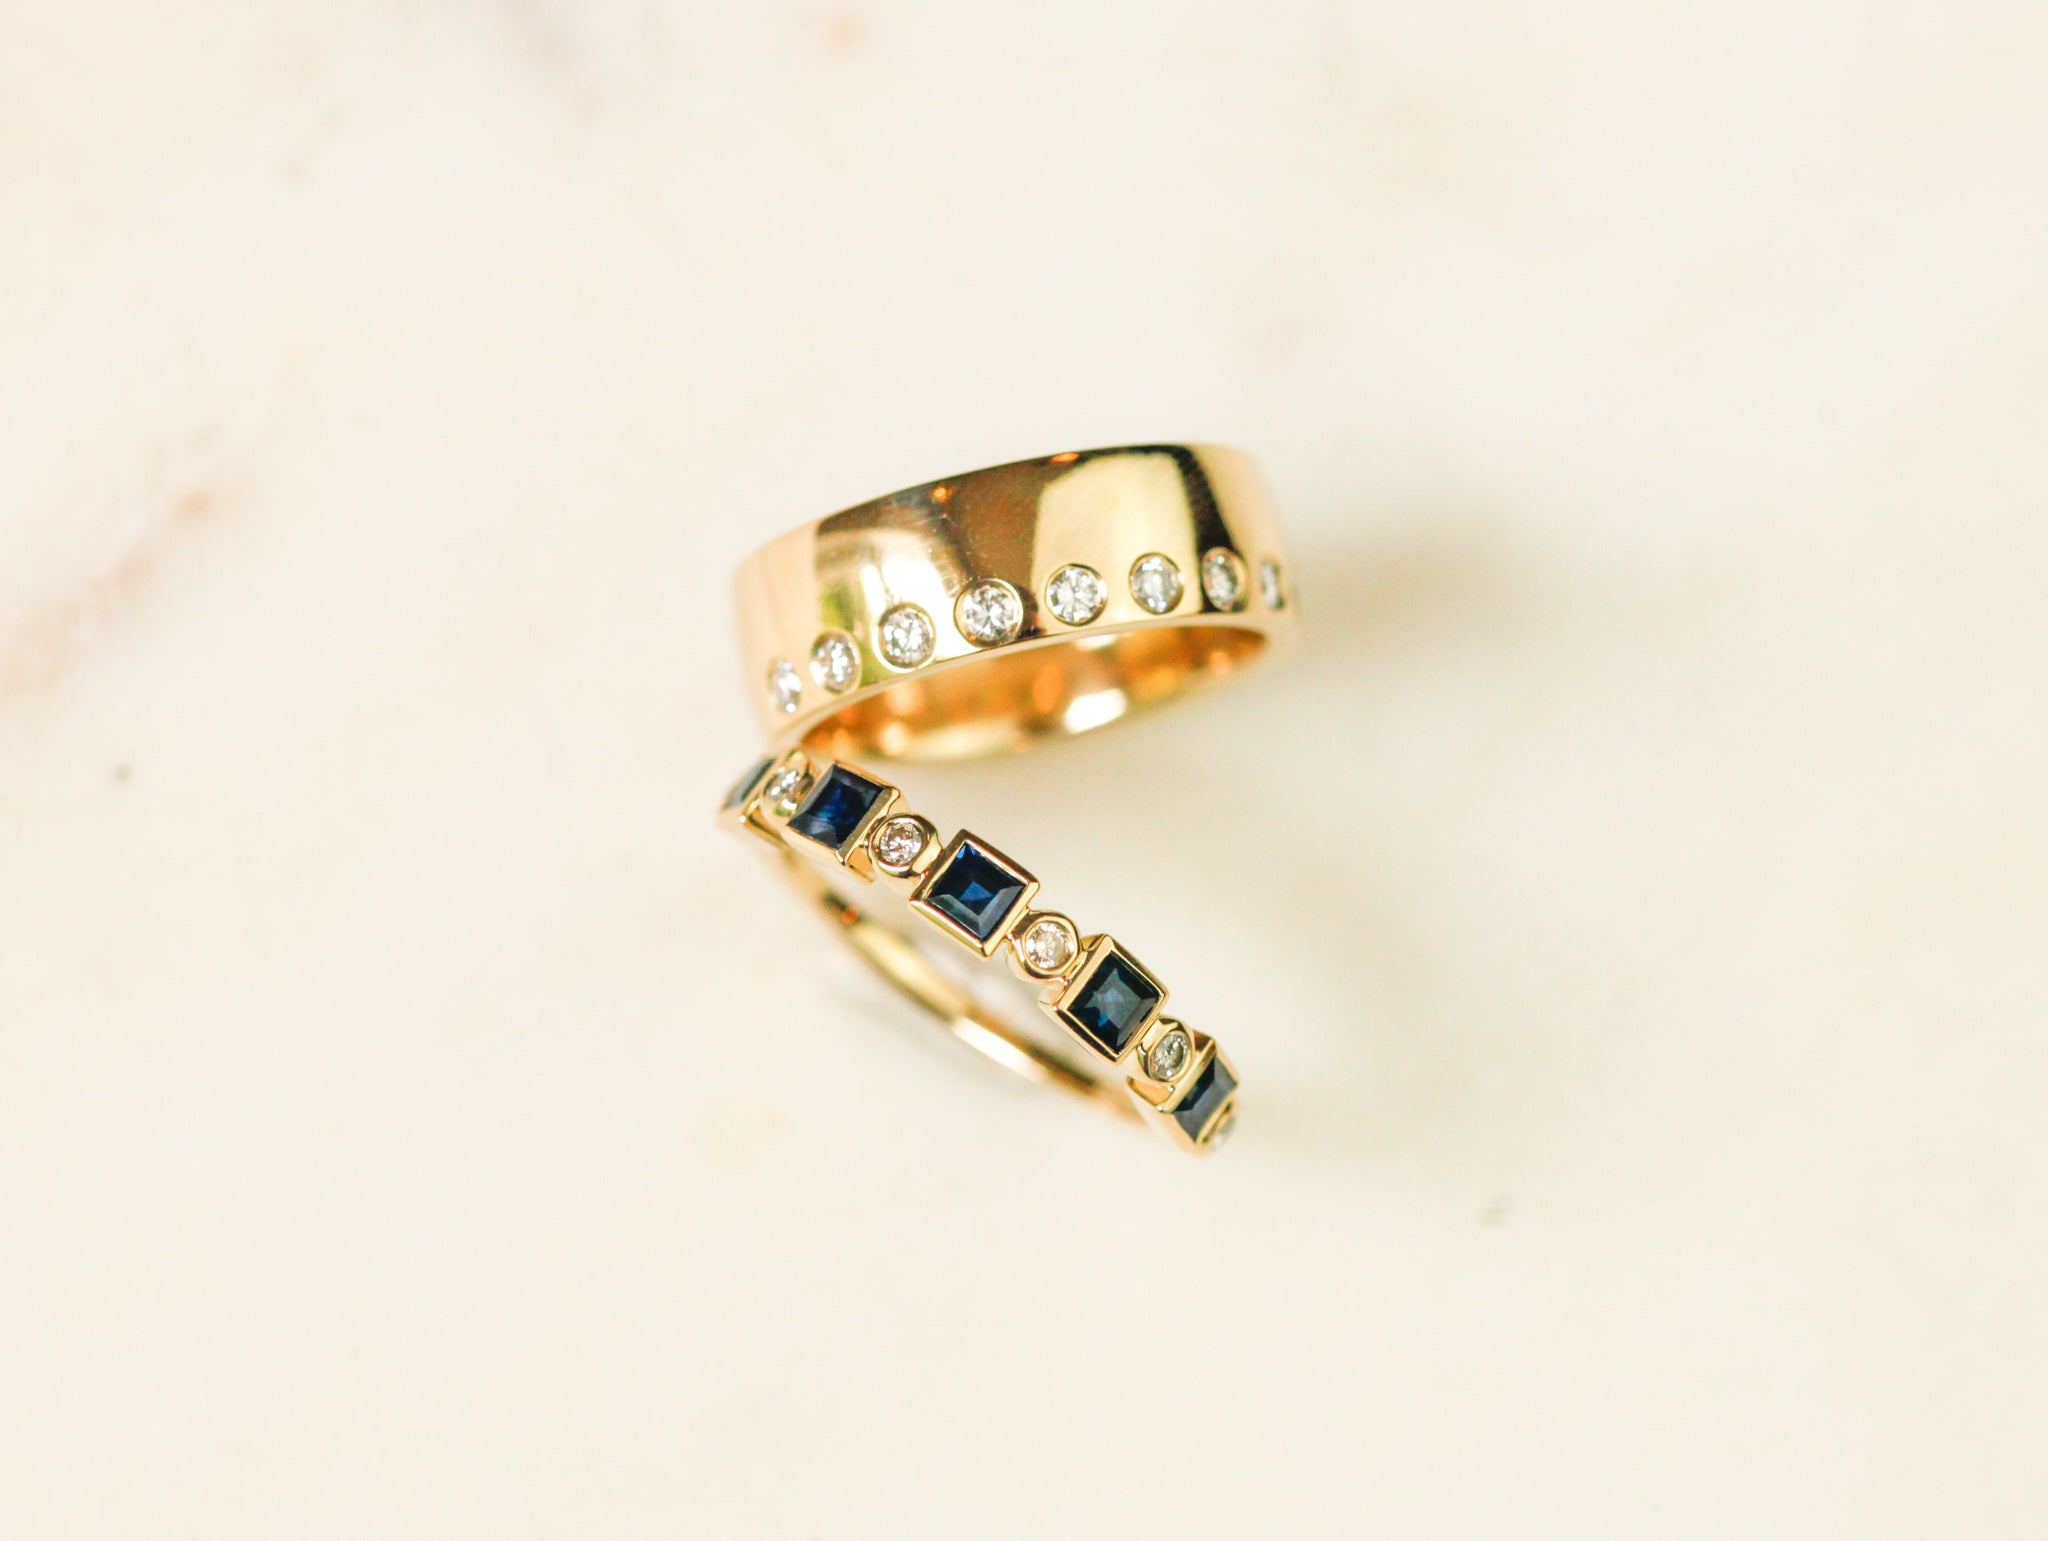 Glen & Effie, diamond and sapphire bezel bands to stack, mix, and match. Heirloom rings reset and transformed into a new design. Nashville jewelry designer who redesigns old jewelry.